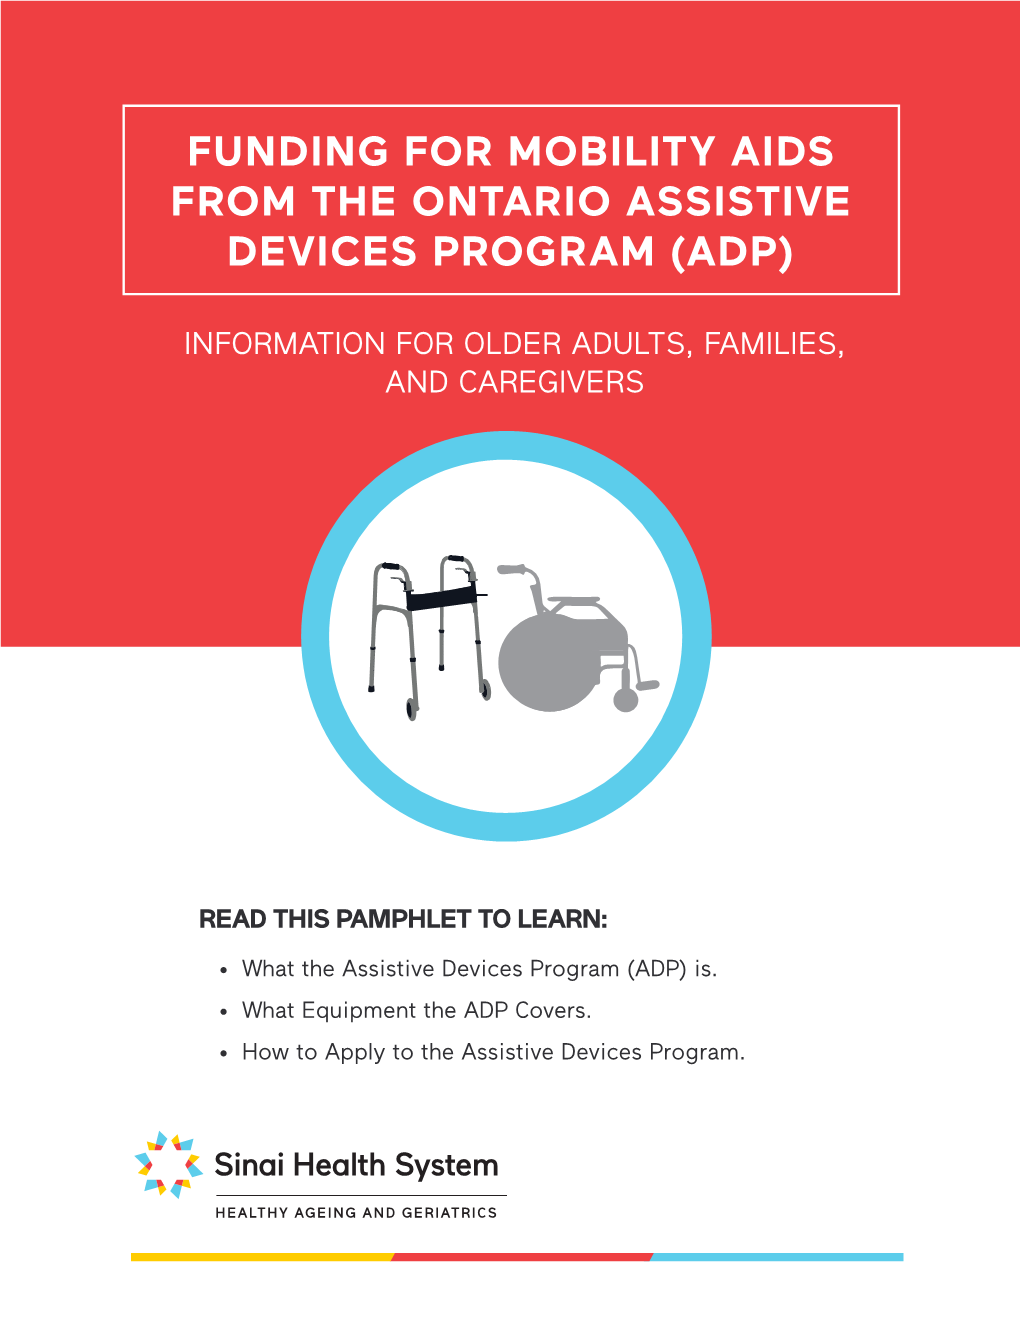 Funding for Mobility Aids from the Ontario Assistive Devices Program (Adp)